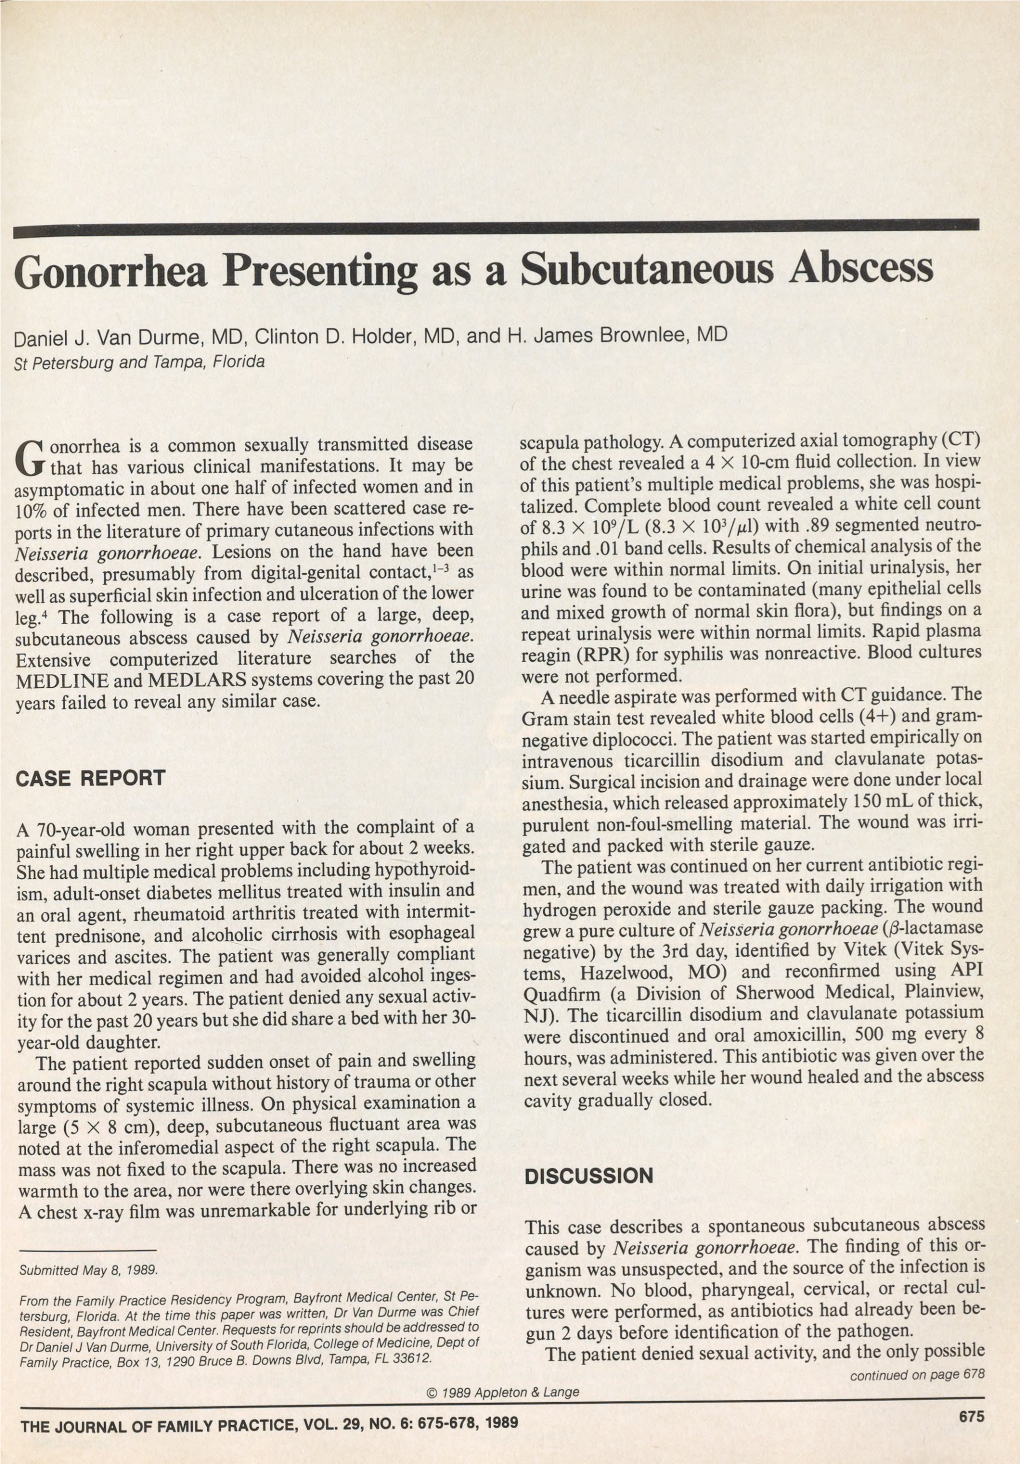 Gonorrhea Presenting As a Subcutaneous Abscess